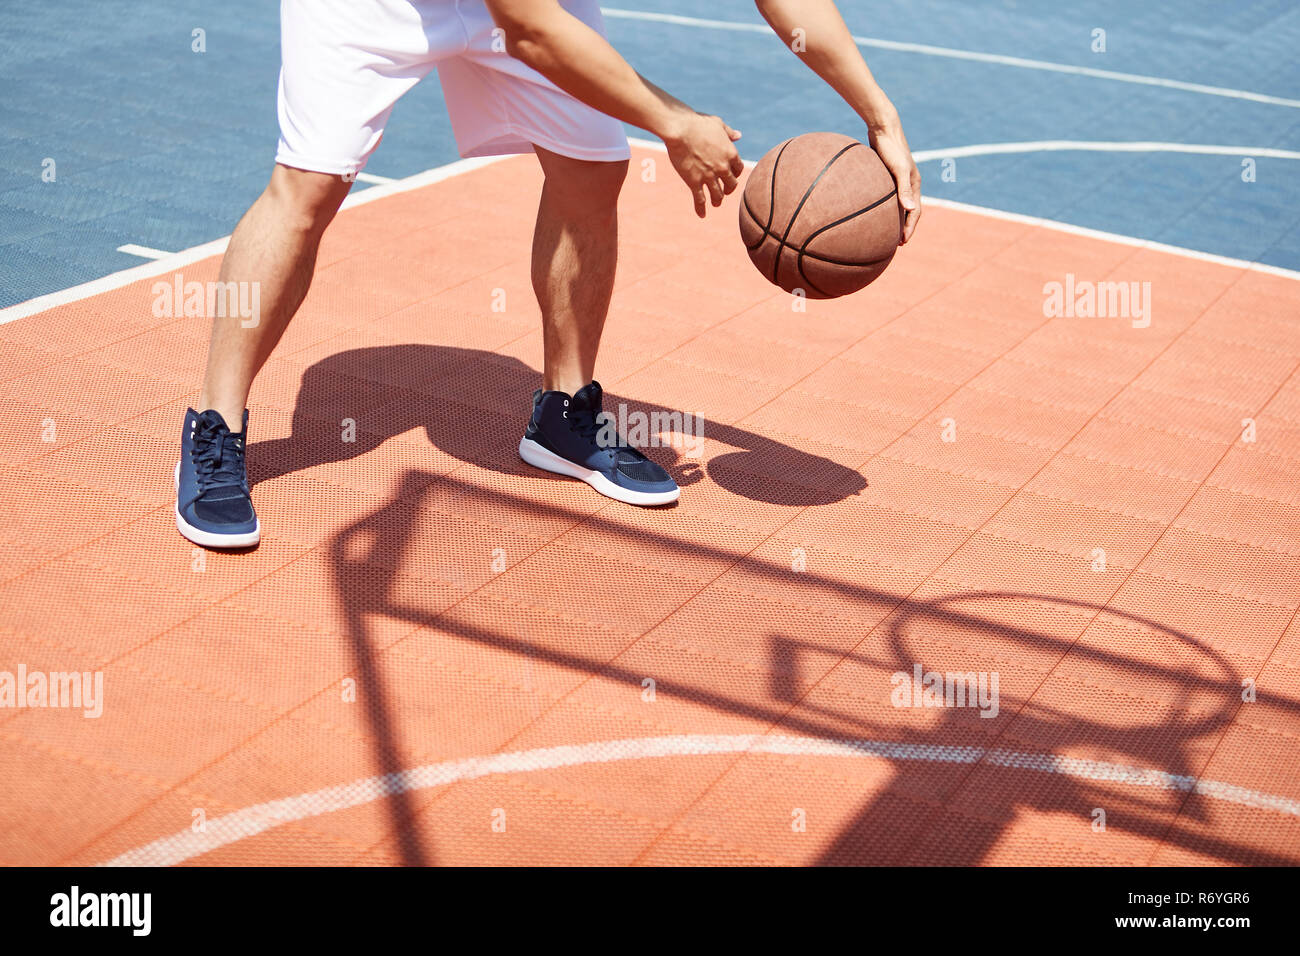 young asian male basketball player practicing ball handling skills on outdoor court. Stock Photo